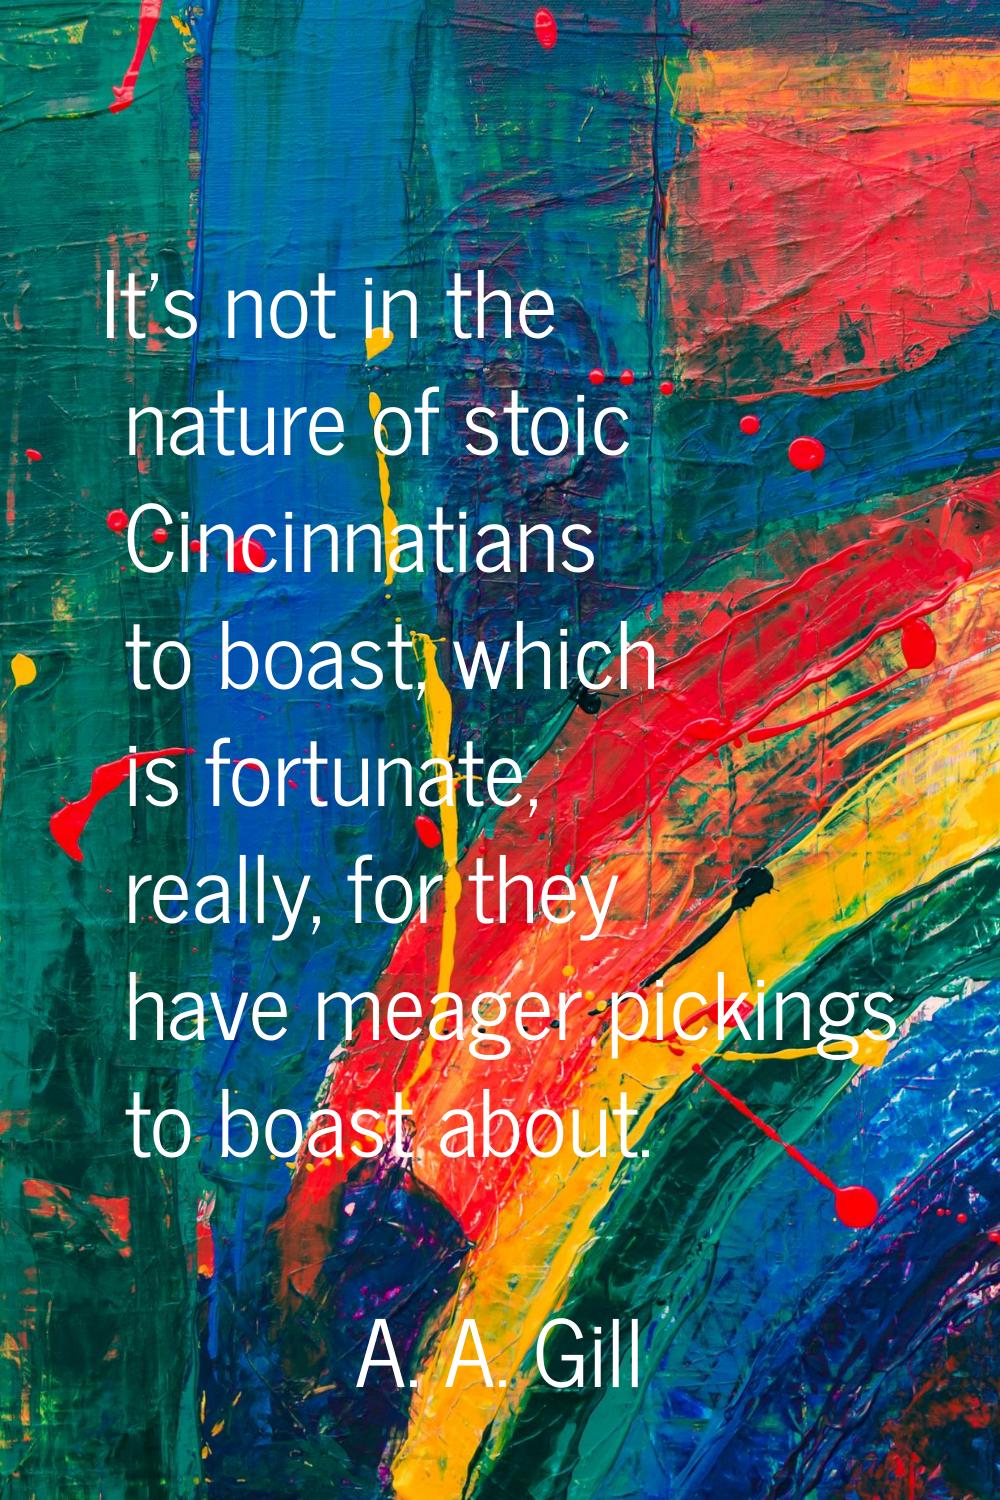 It's not in the nature of stoic Cincinnatians to boast, which is fortunate, really, for they have m